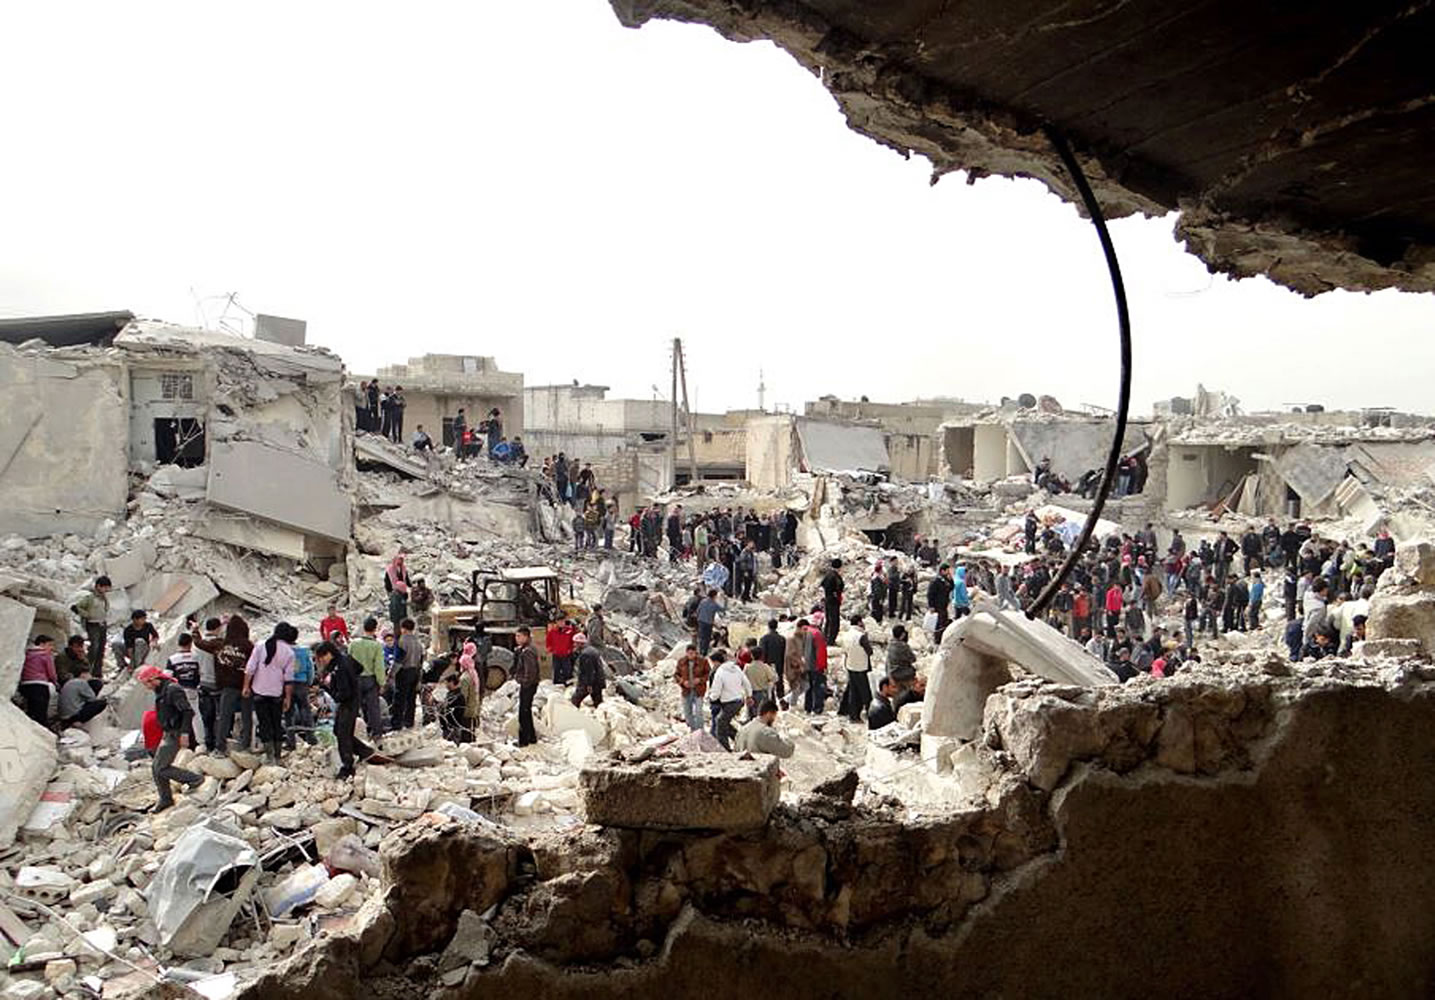 An provided by Aleppo Media Center AMC, which has been authenticated based on its contents and other AP reporting, shows people searching the rubble for bodies and injured victims at a site were houses were hit by a missile attack by Syrian government forces in the neighborhood of Ard Al-Hamra, Aleppo, Syria, on Tuesday.